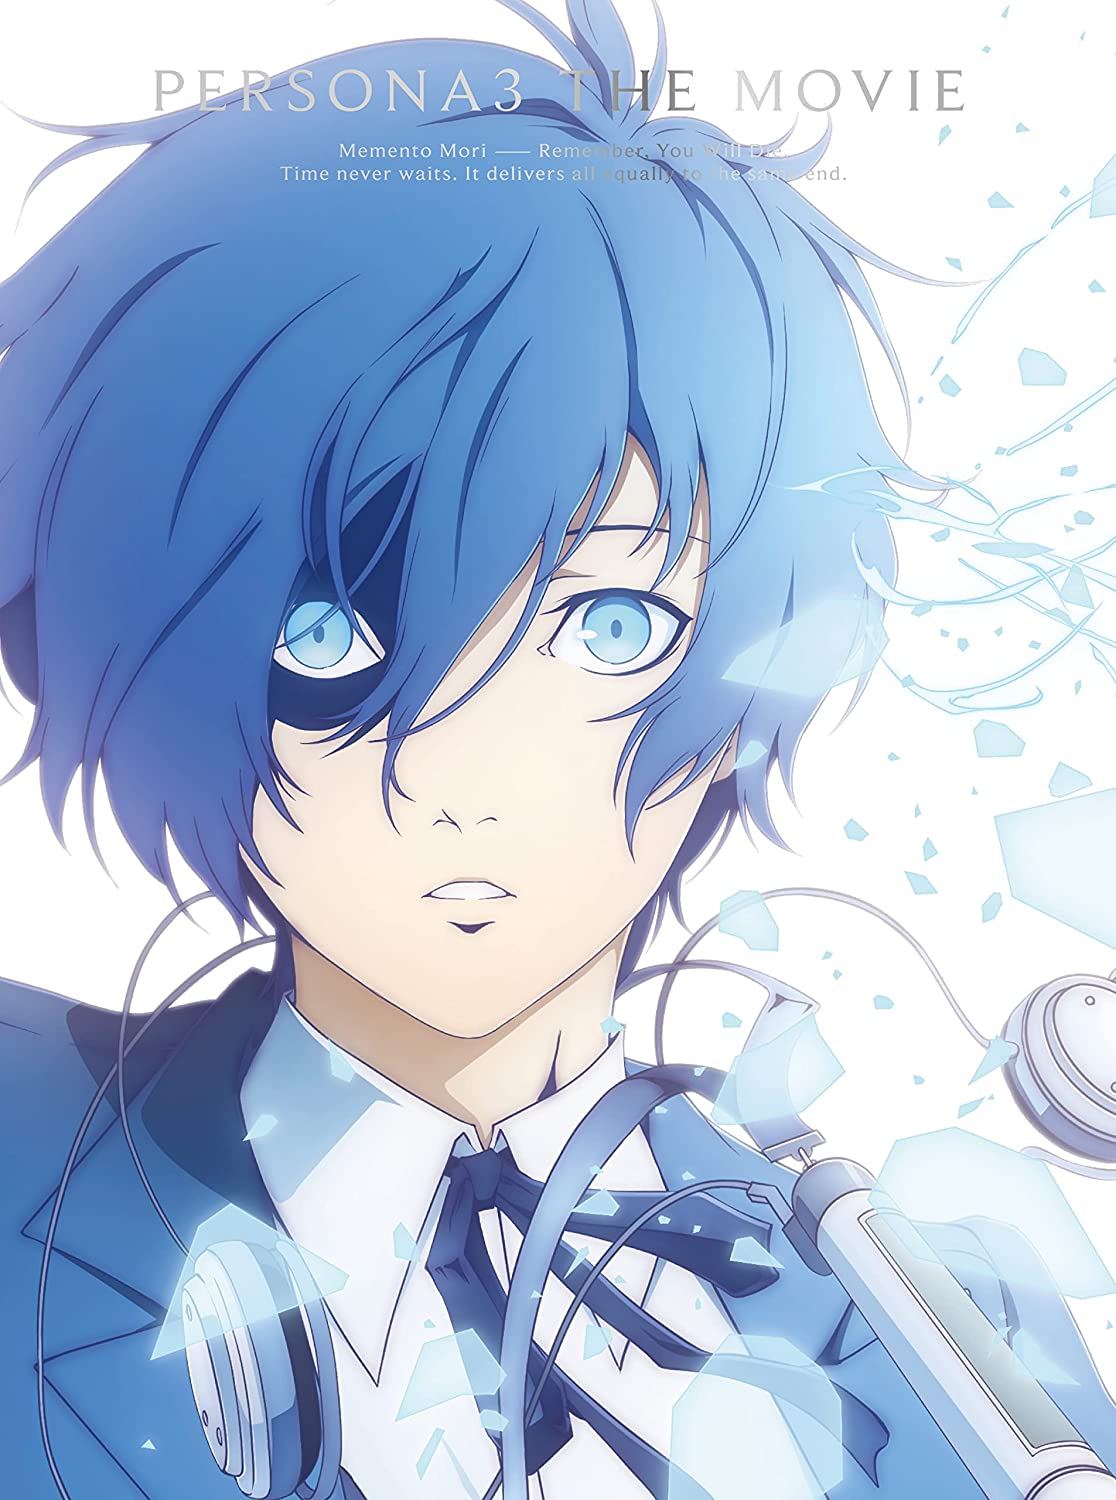 Persona 3 The Movie Blu-ray Disc Box [Limited Edition]